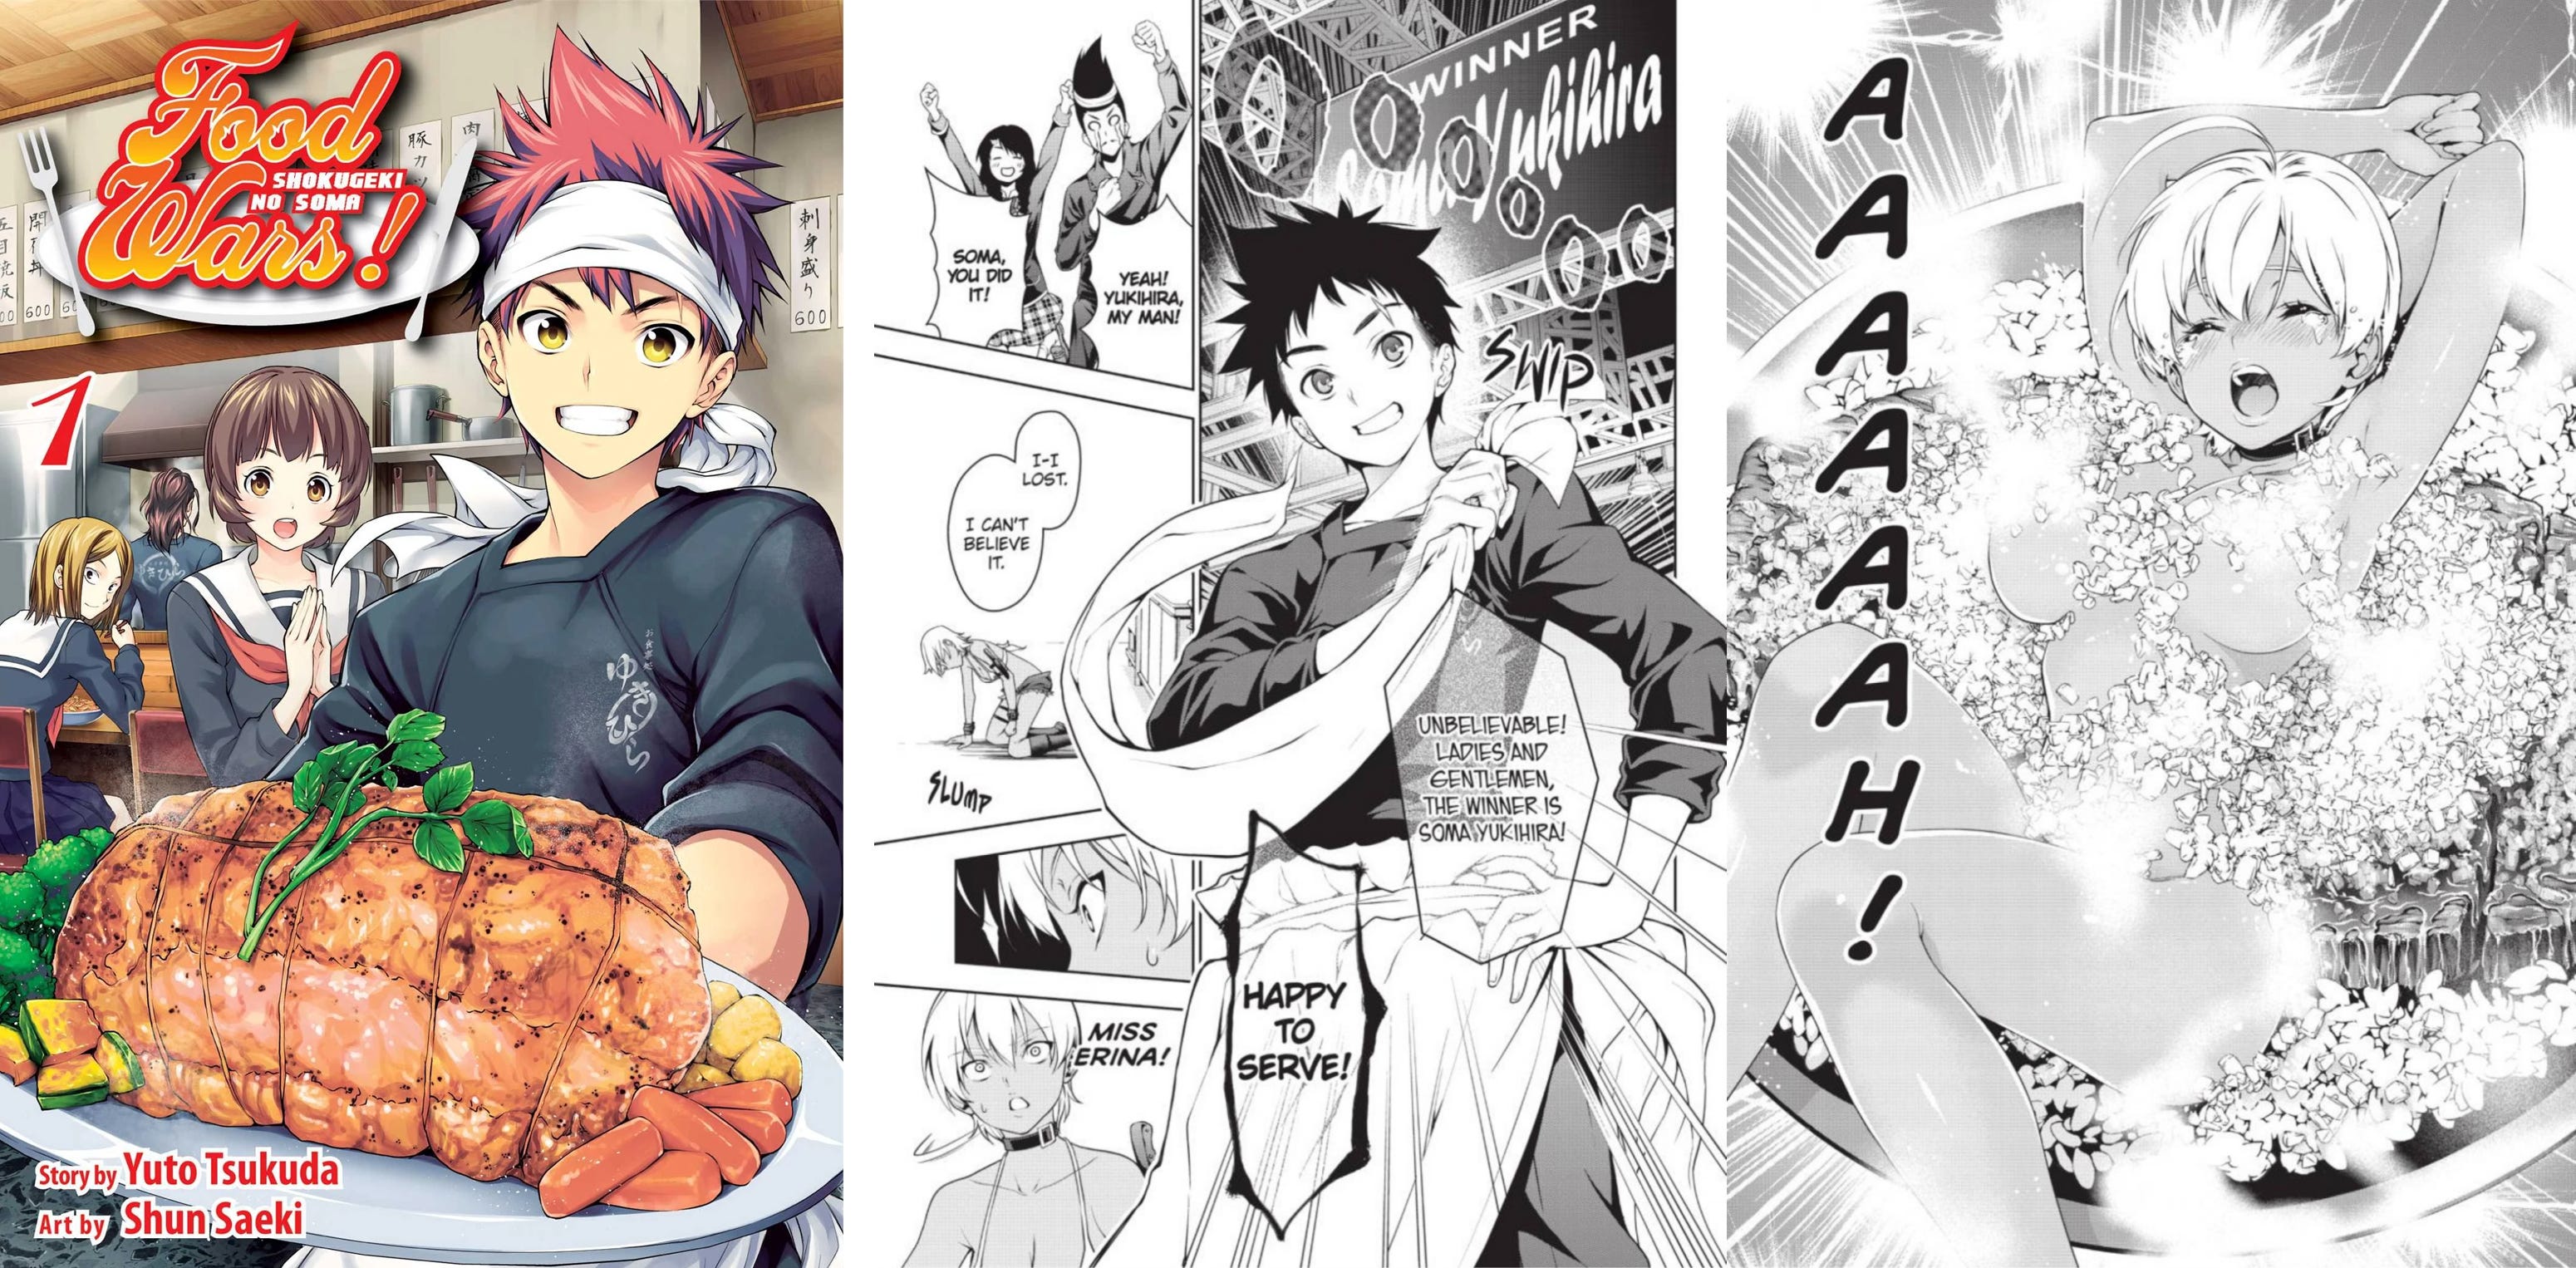 Food Manga: Where Culture, Conflict And Cooking All Collide